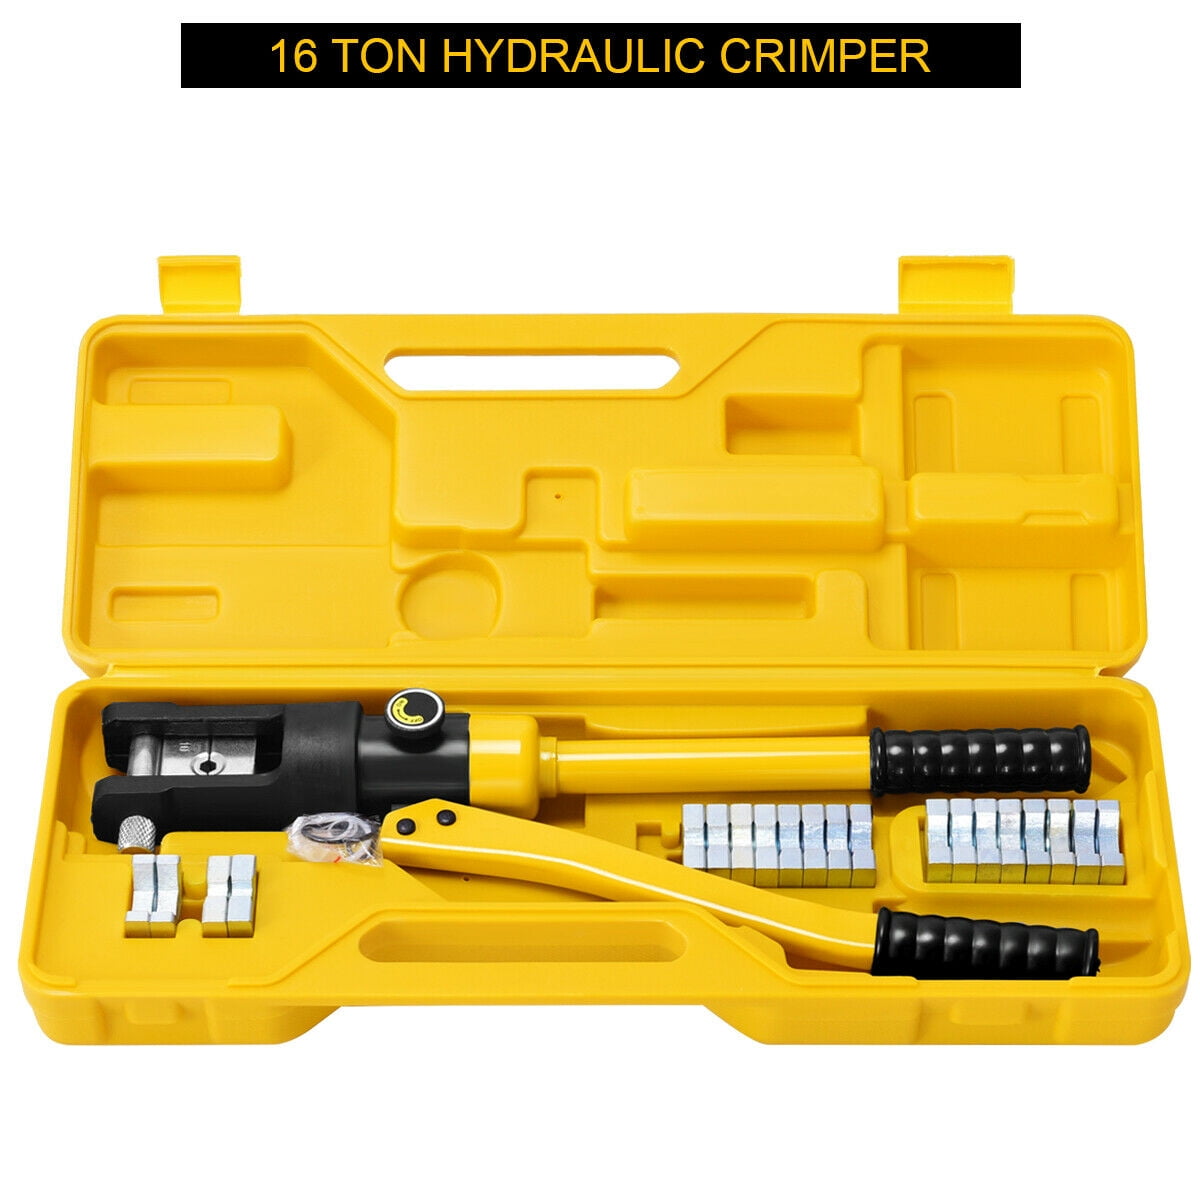 Ideal for Terminating Copper/Aluminum Lugs Terminals Insulated Handle Steel Body YQK-70 Bonvoisin Hydraulic Crimping Tool 8T with 9 Dies of 4-70mm²  in Thick Chrome